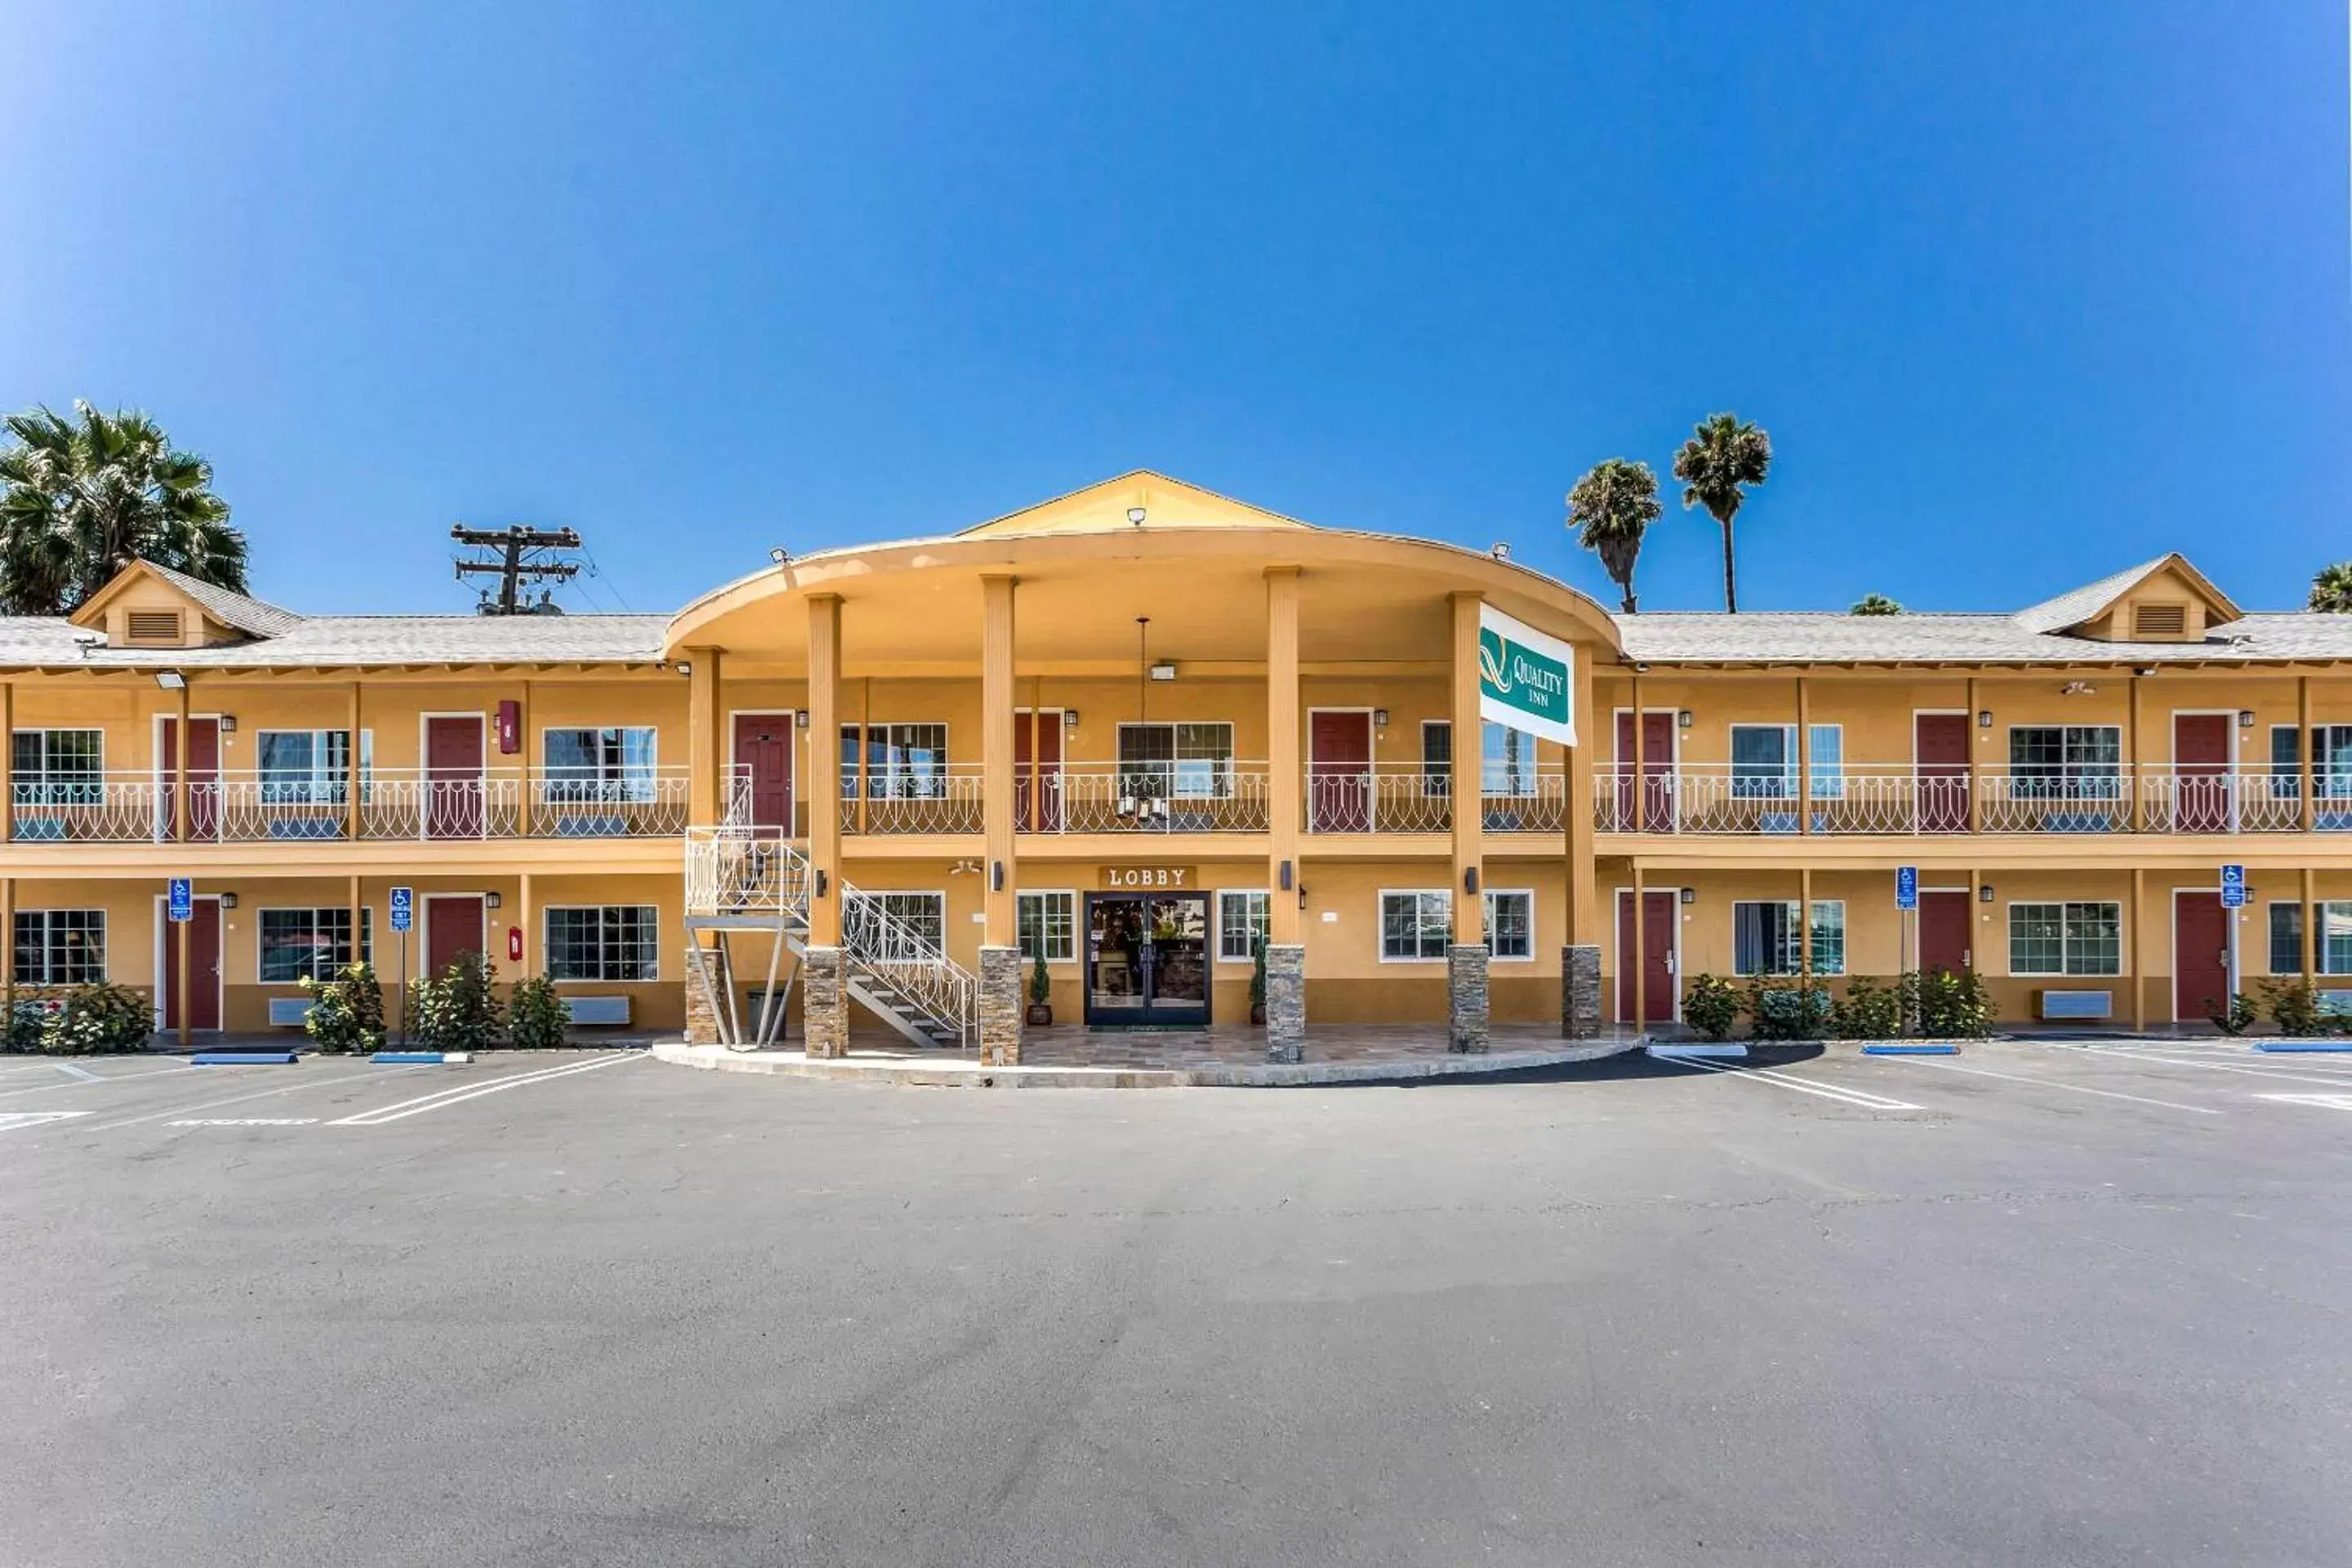 Property Building in Quality Inn Escondido Downtown